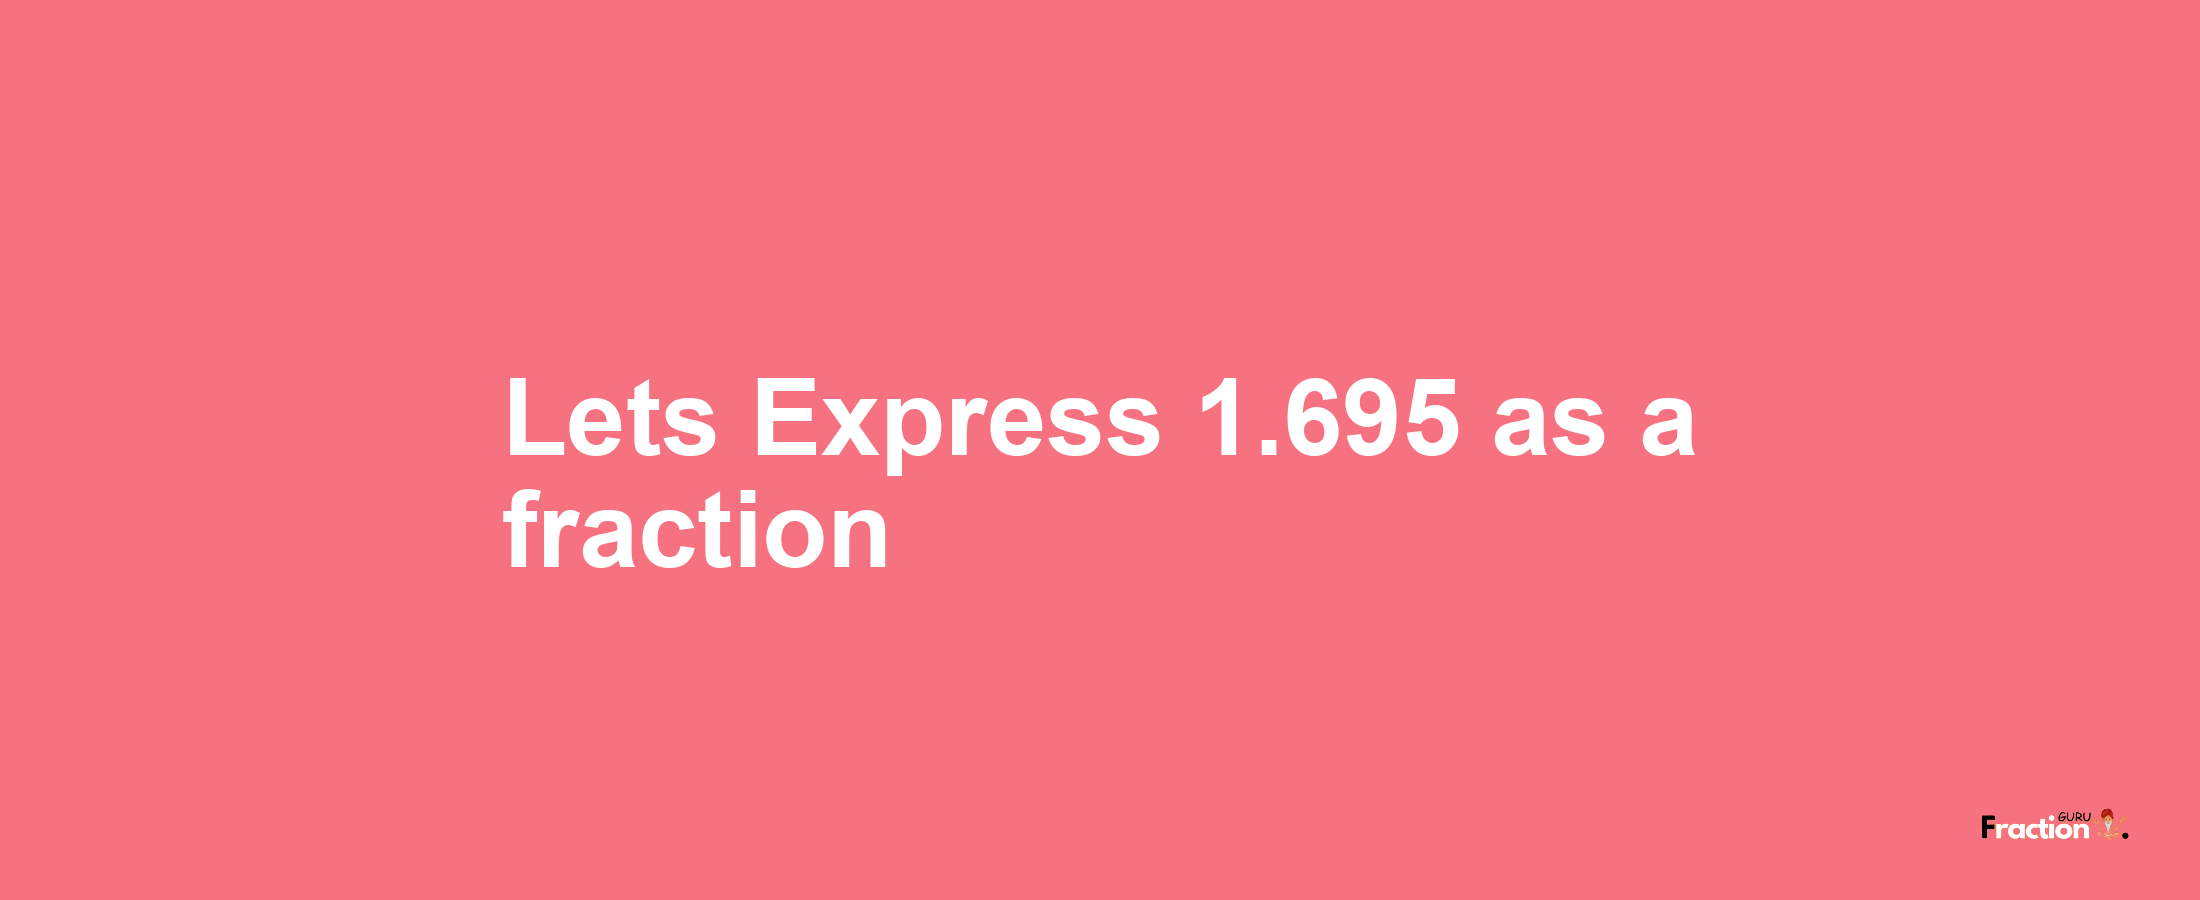 Lets Express 1.695 as afraction